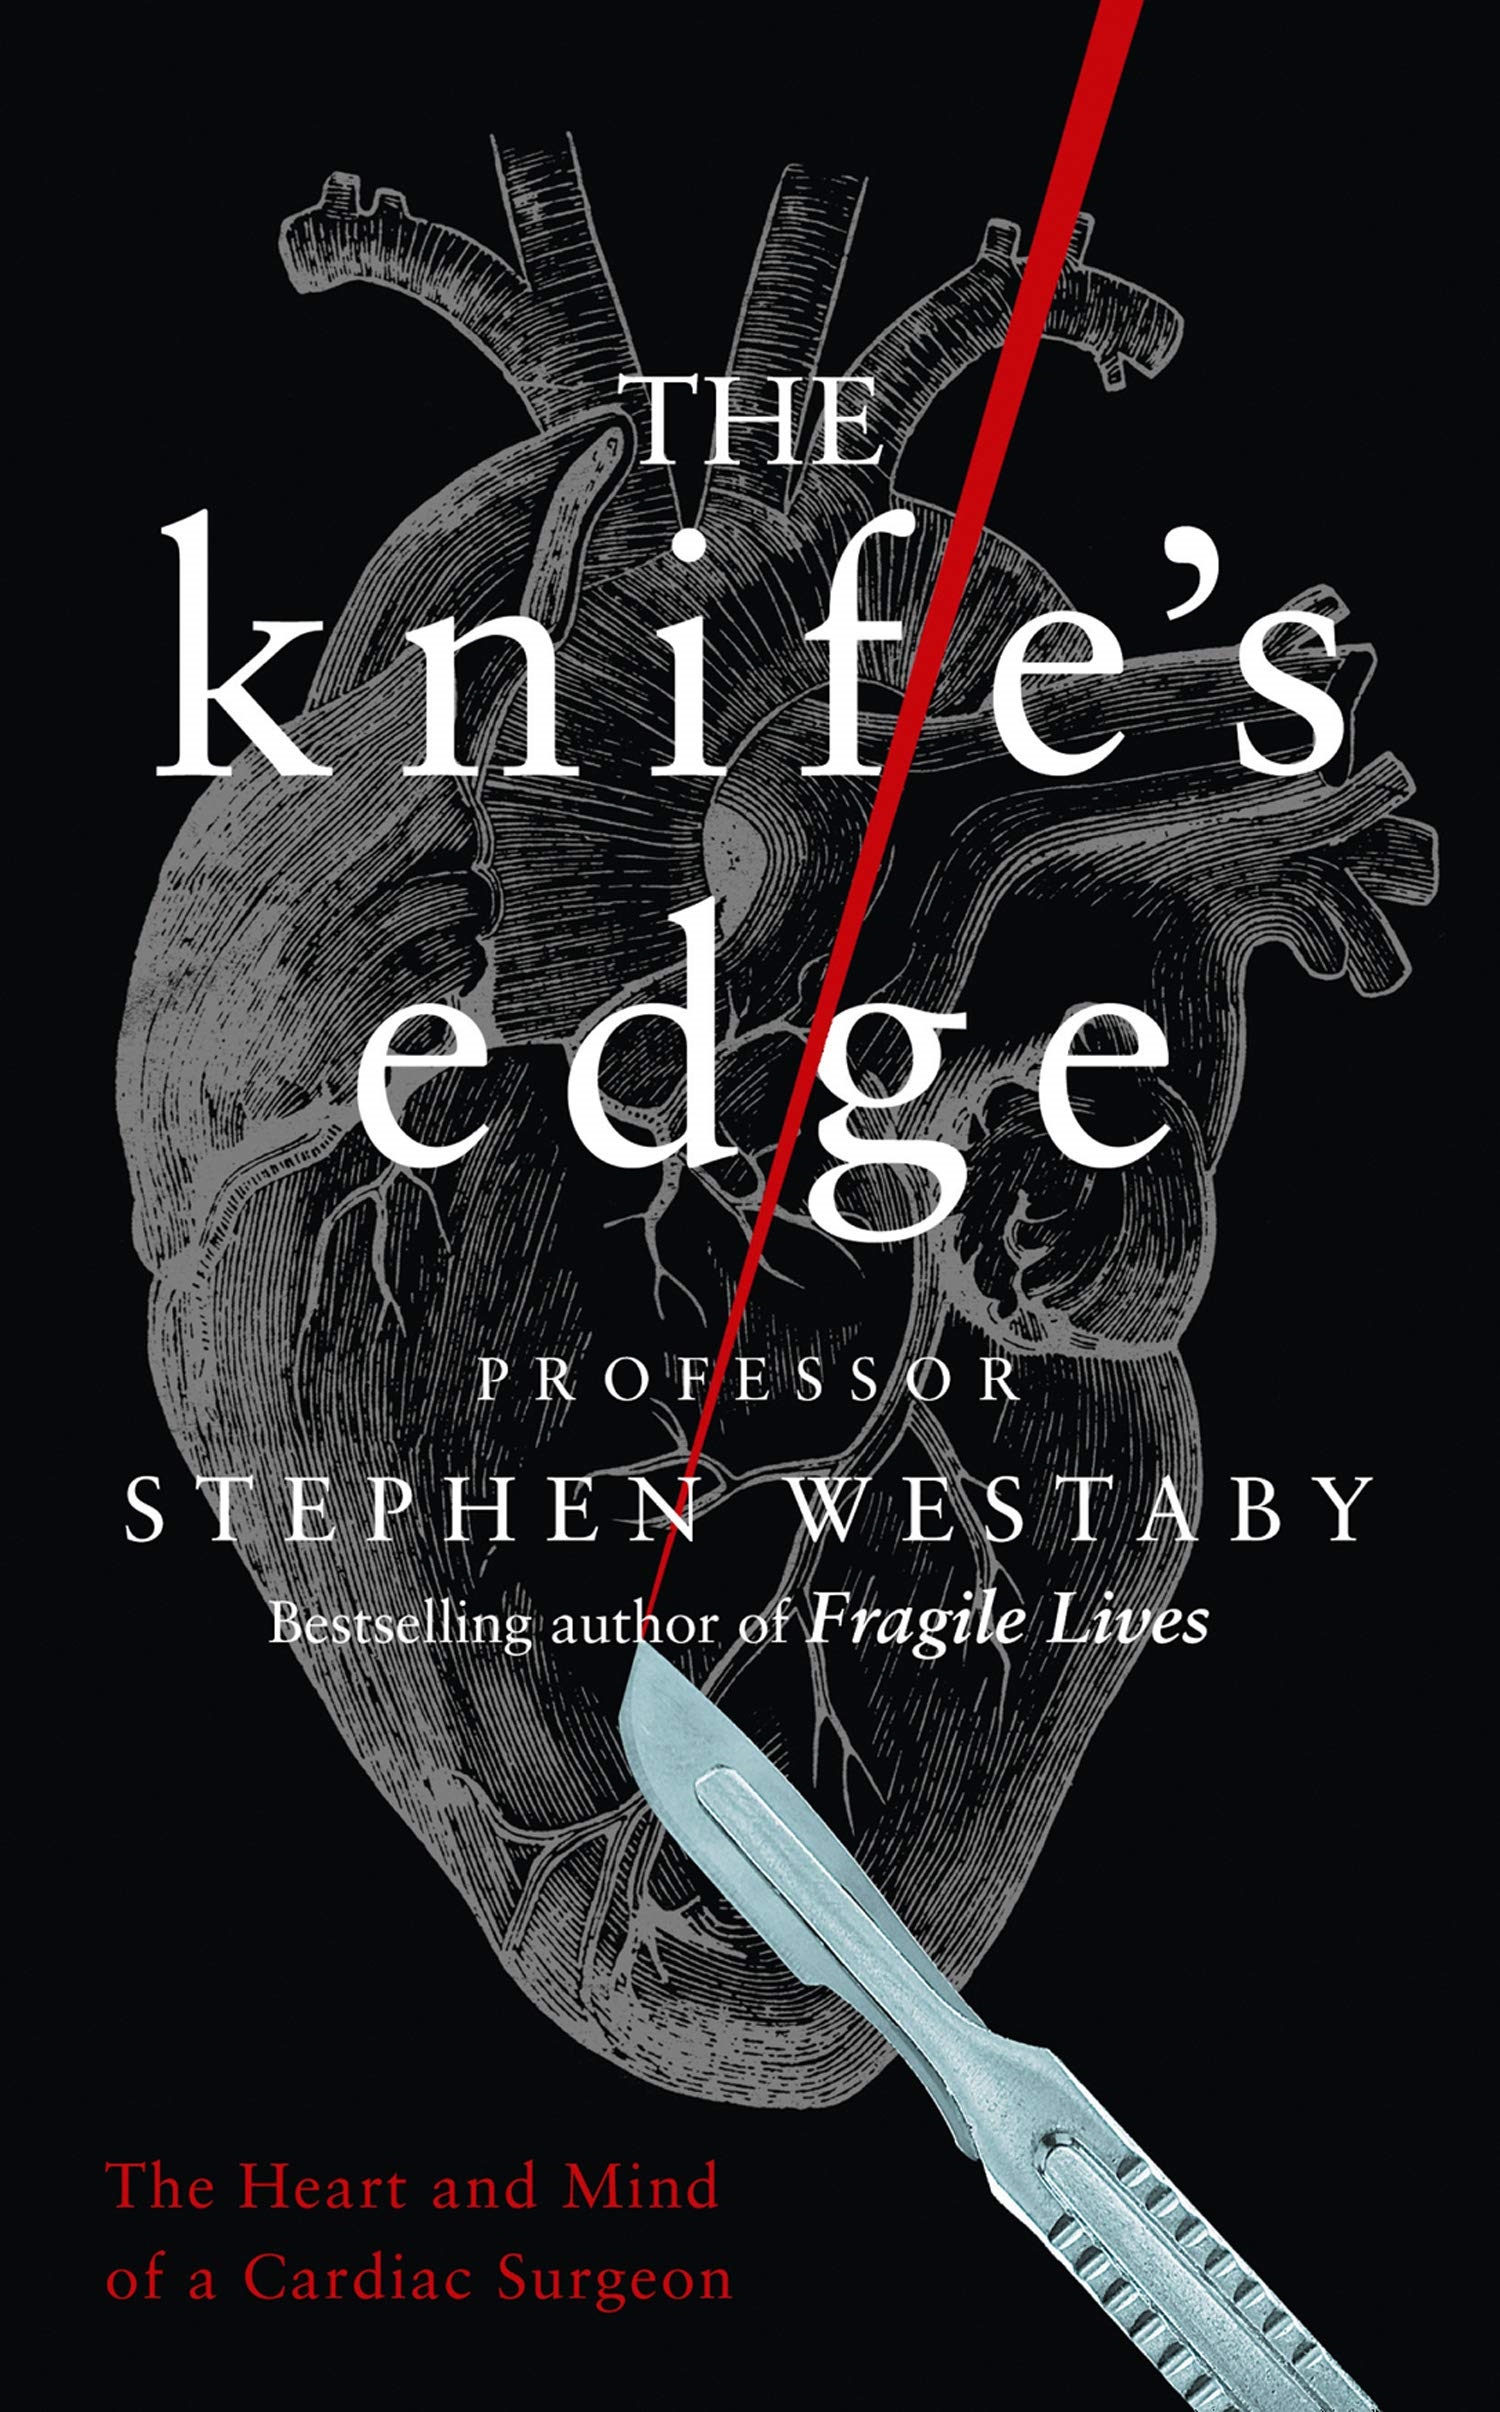 Book cover of heart. The Knifes Edge by Stephen Westaby.